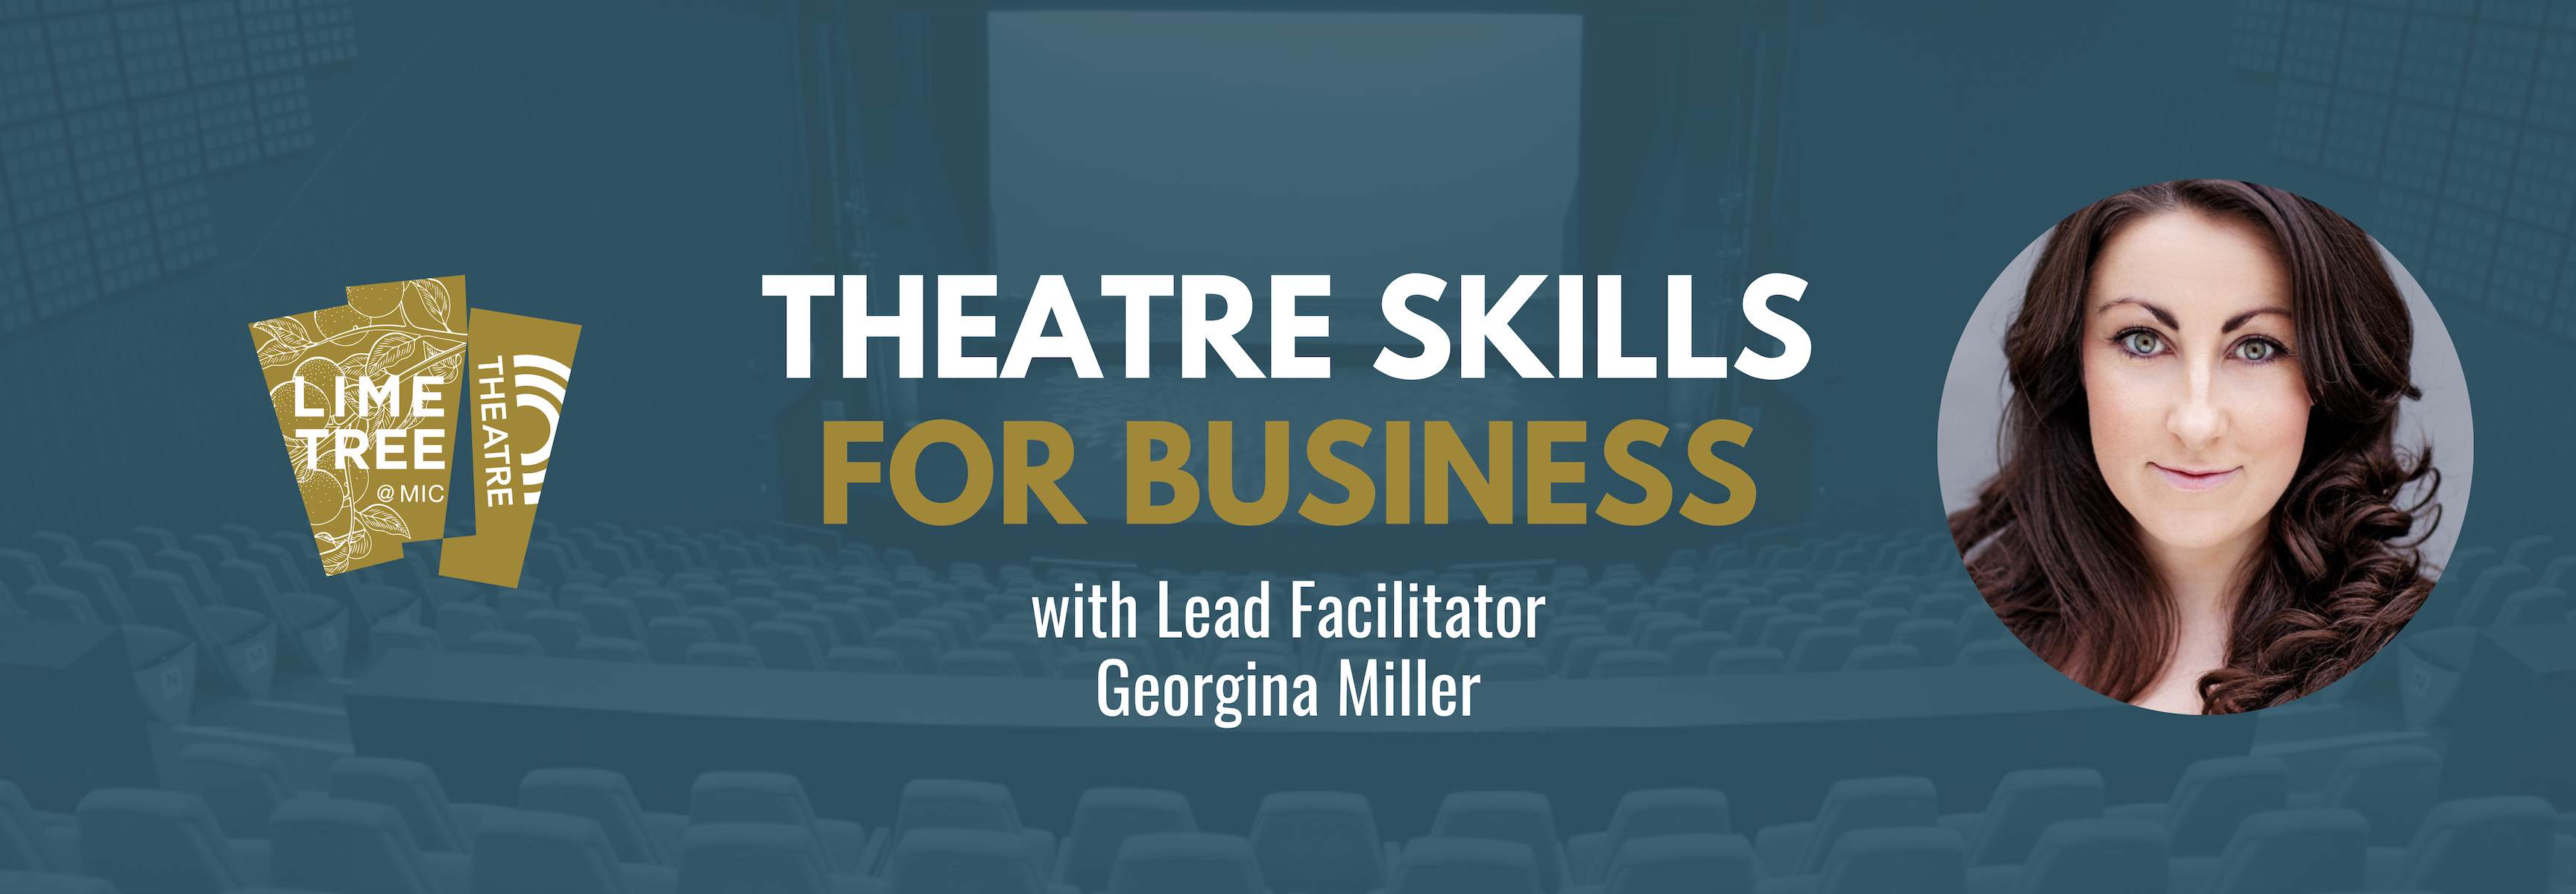 Theatre Skills for Business